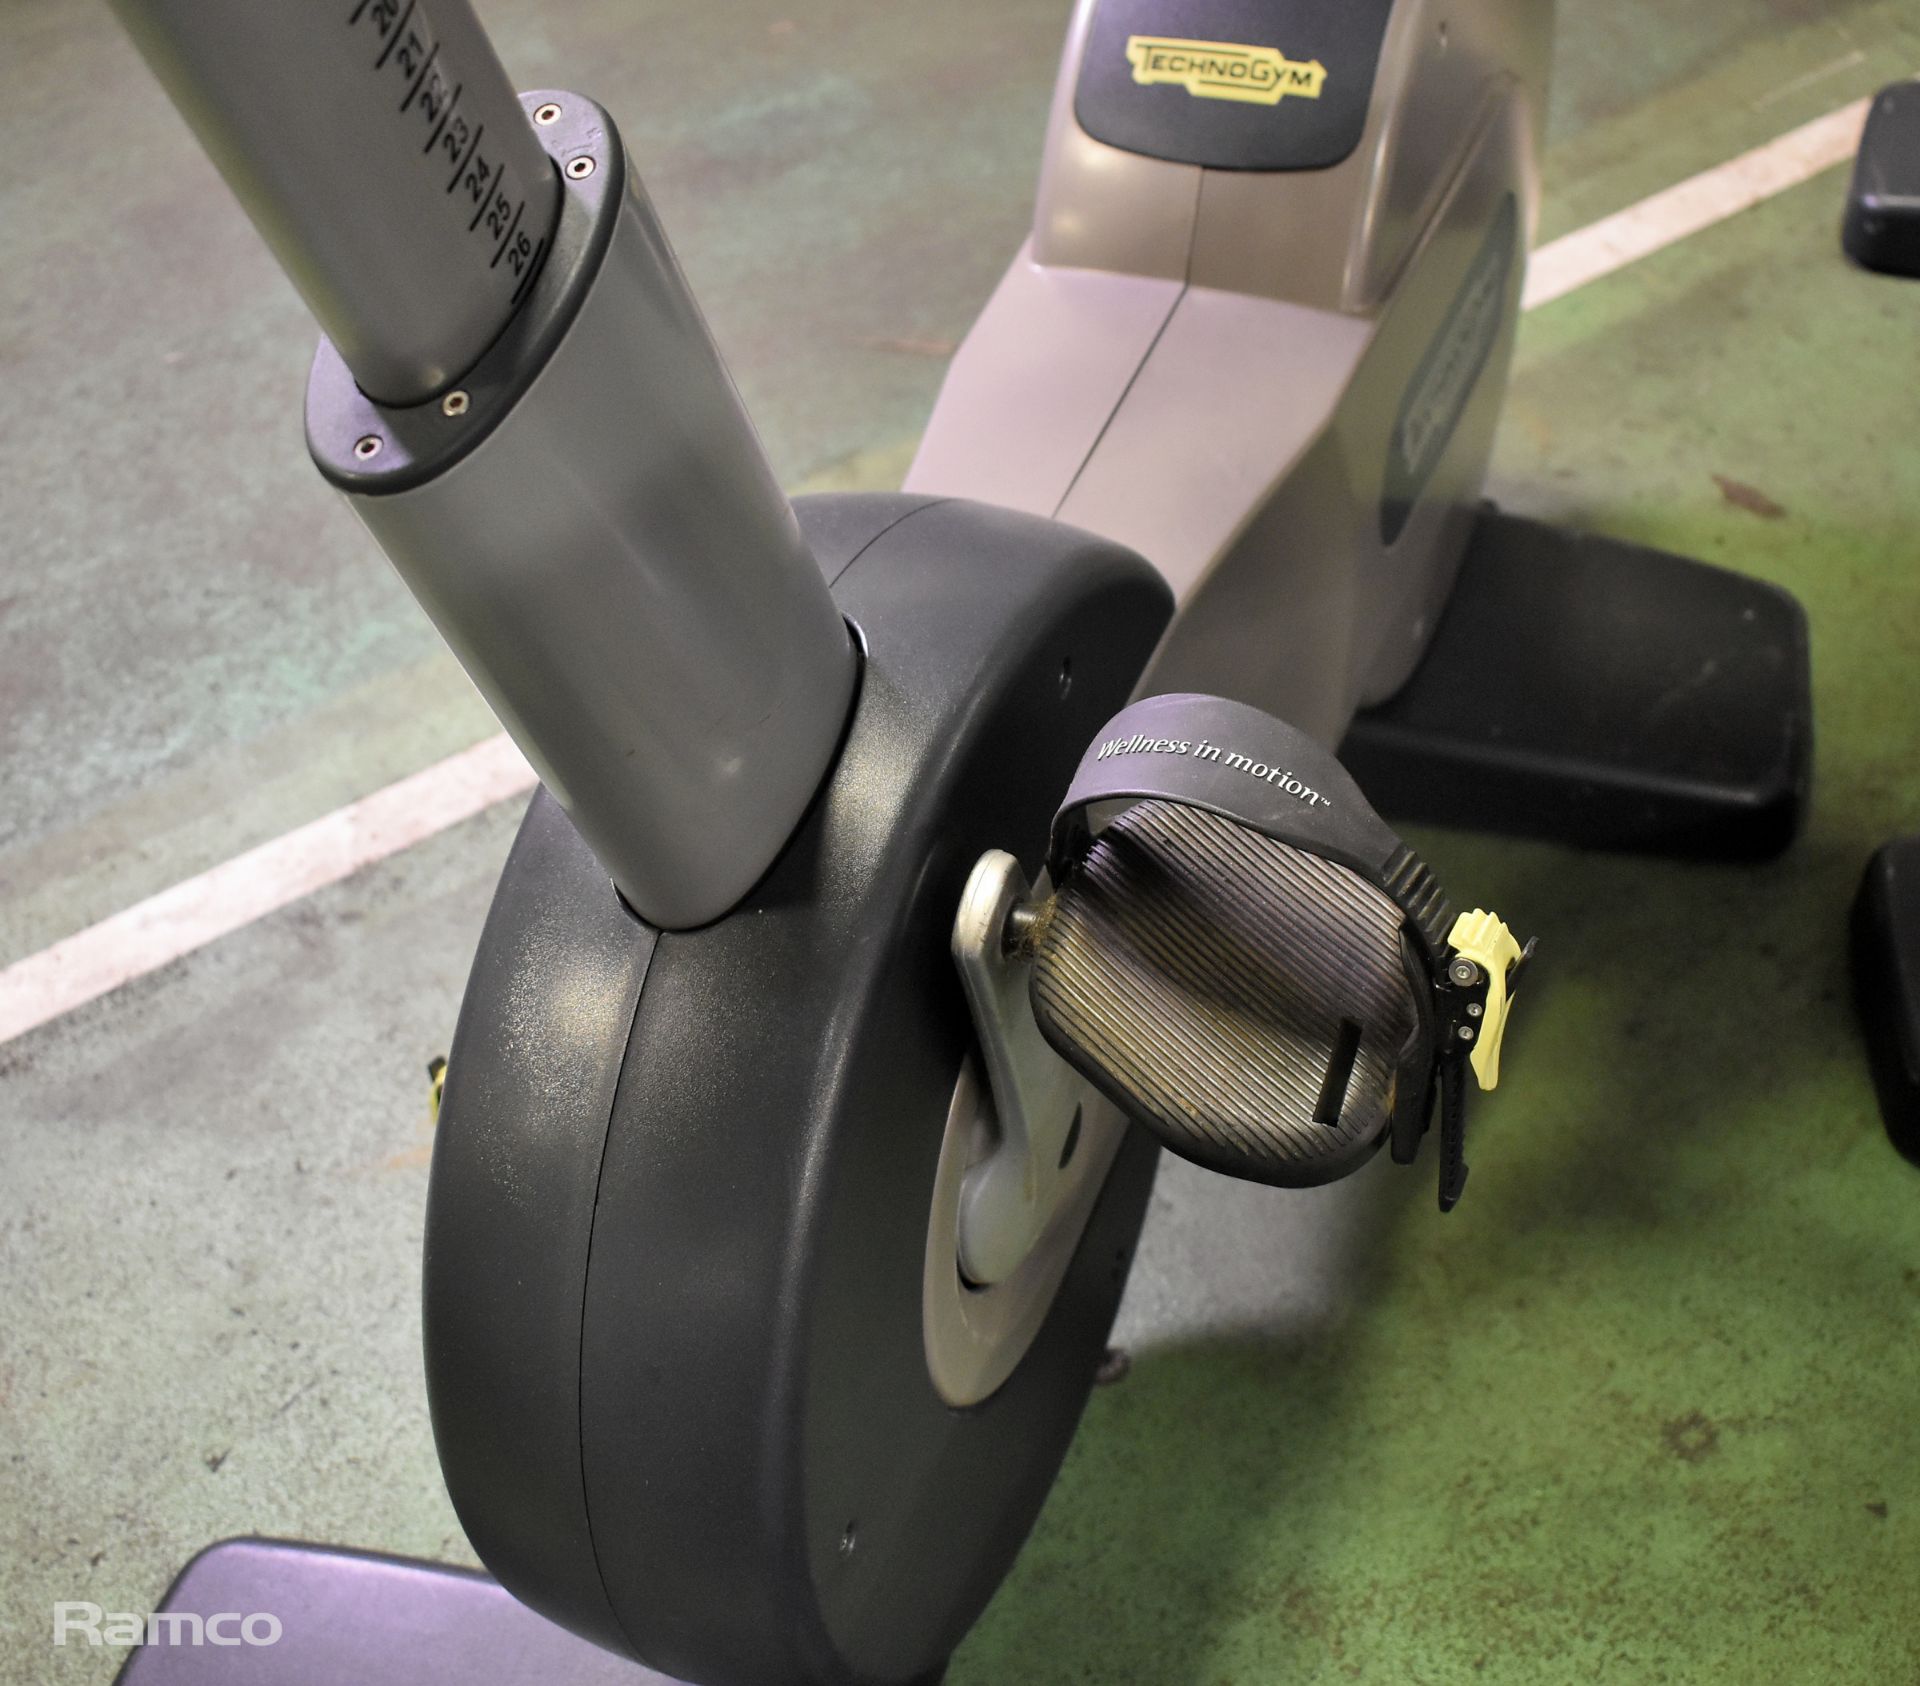 TechnoGym static exercise bike - W 550 x D 1210 x H 1380mm - Image 3 of 6